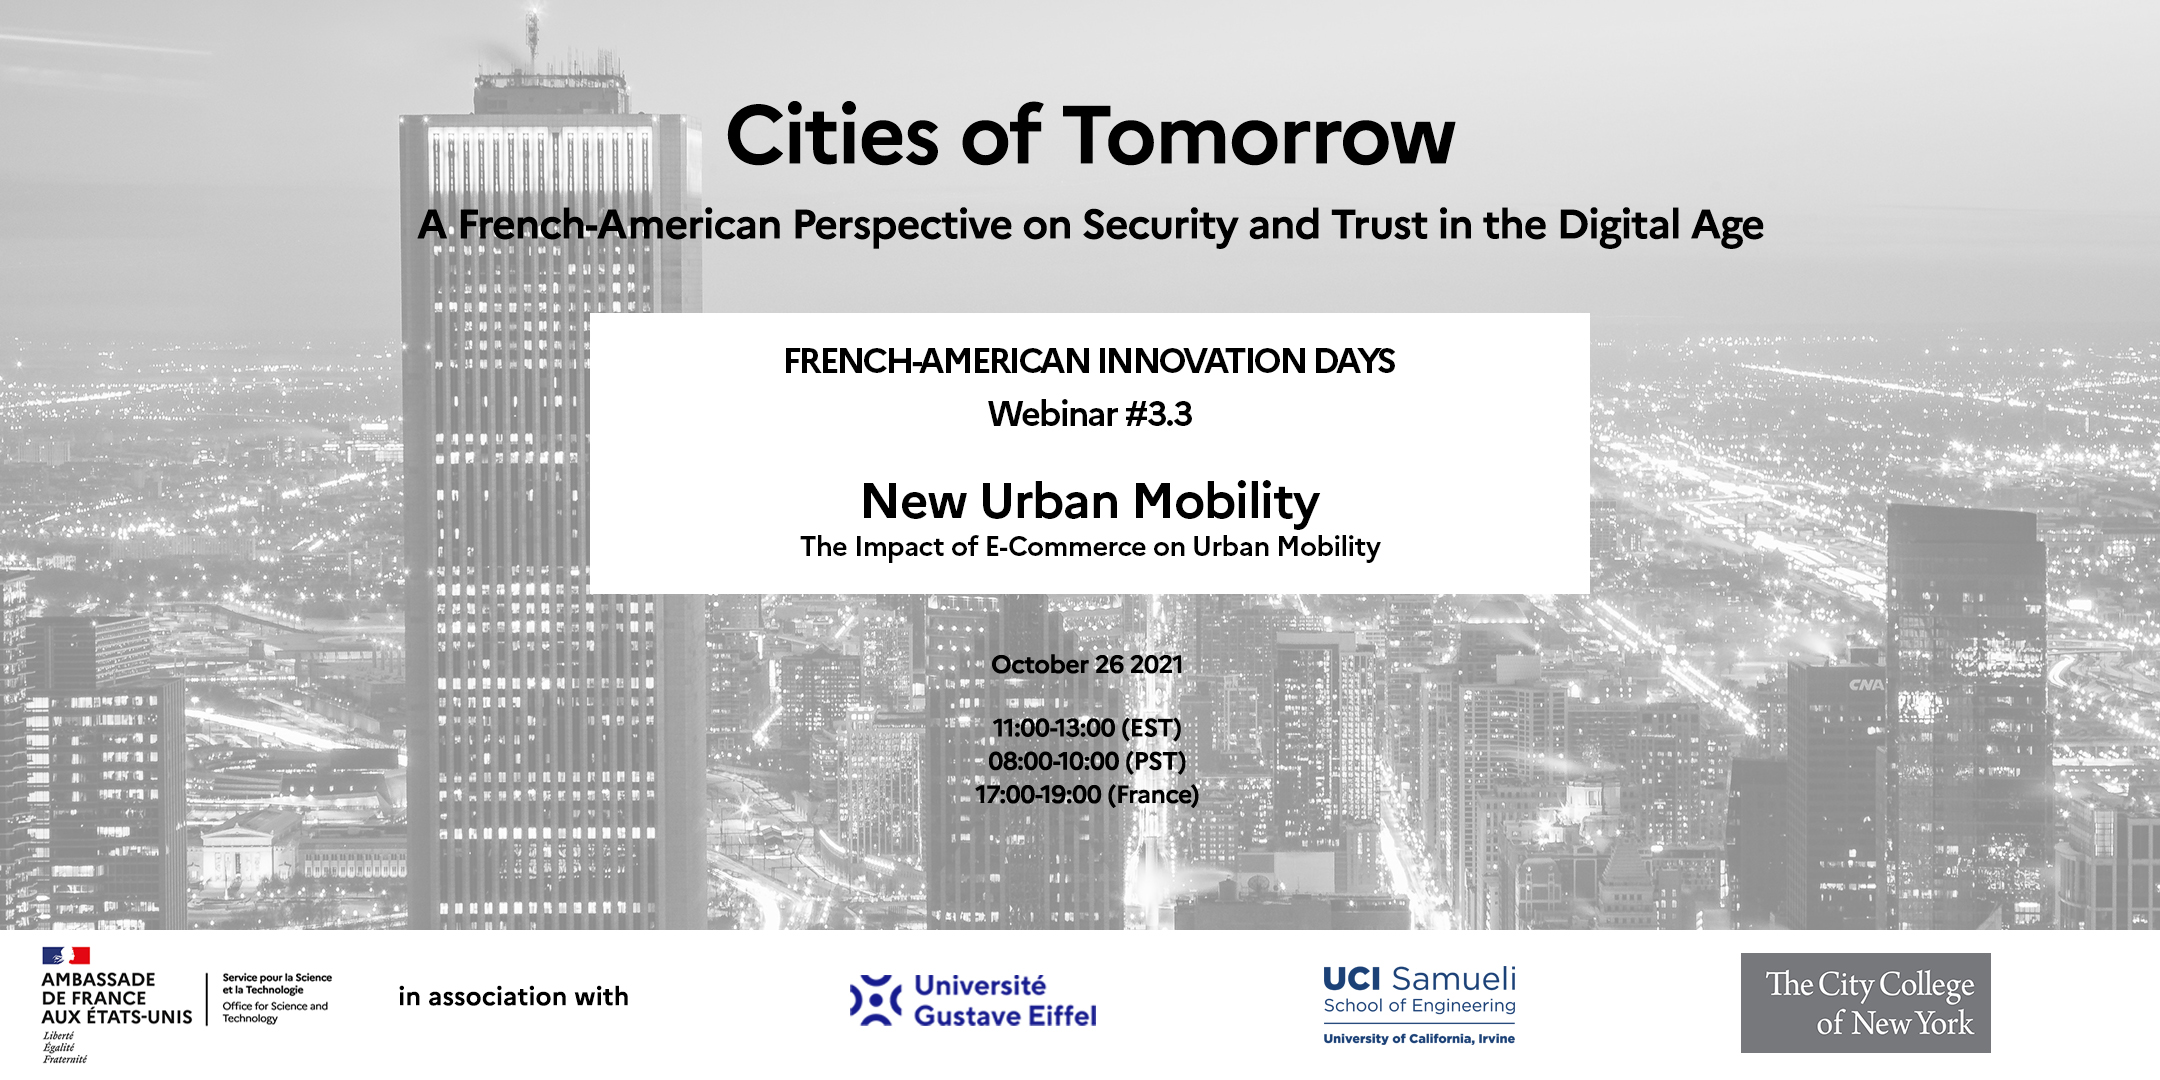 [EN] VIDEO : Webinar #3.3 French-American Innovation Day – Cities of Tomorrow : The impact of E-Commerce on Urban Mobility